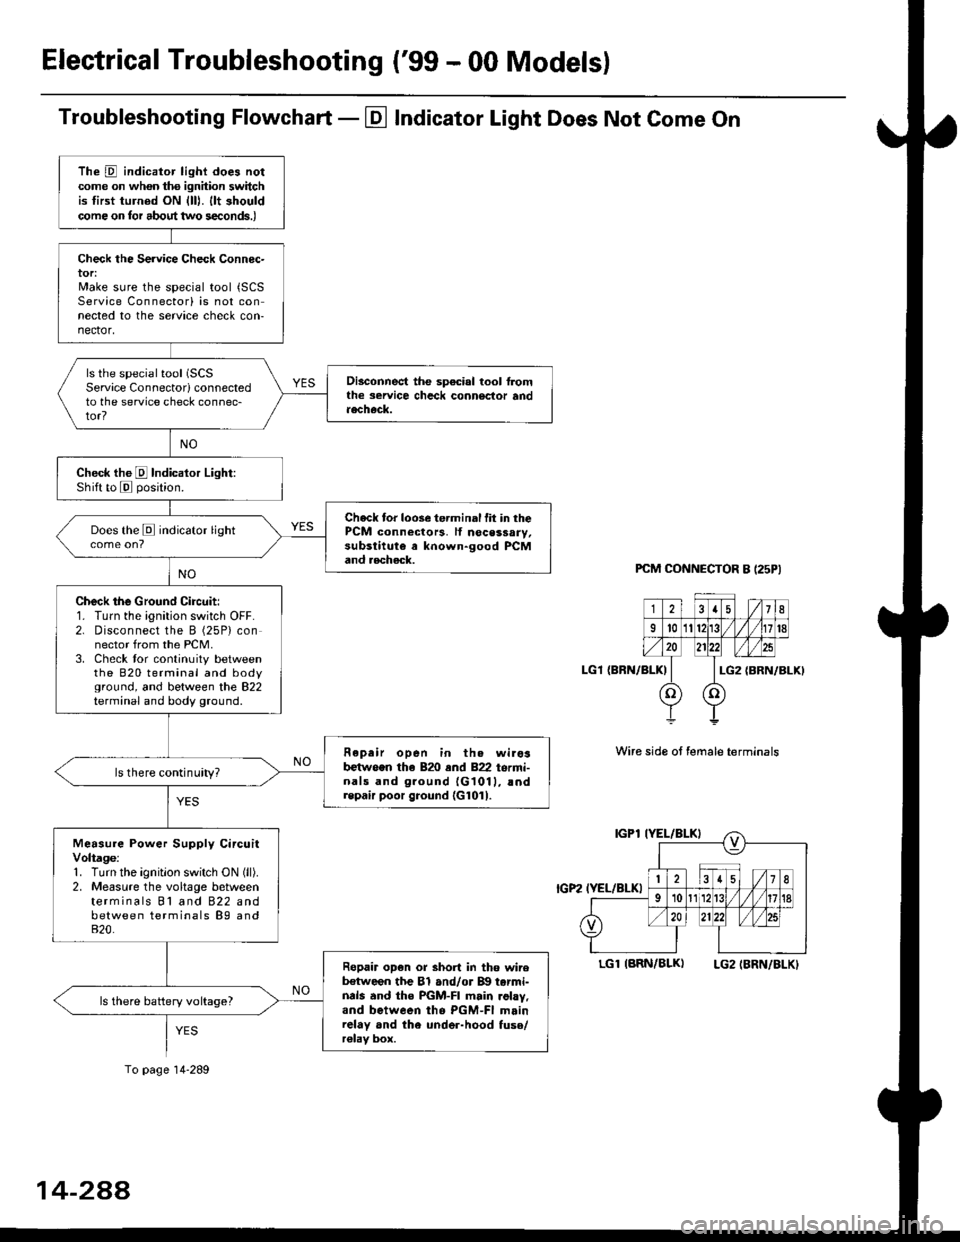 HONDA CIVIC 1996 6.G Owners Manual Electrical Troubleshooting (99 - 00 Models)
Troubleshooting Flowchart - El Indicator Light Does Not Come On
PCM CONNECTOR B I25PI
LGl {BRN/BLK)
Wire side ot female terminals
LGlIARN/BLK) LG2IBRN/BLKI